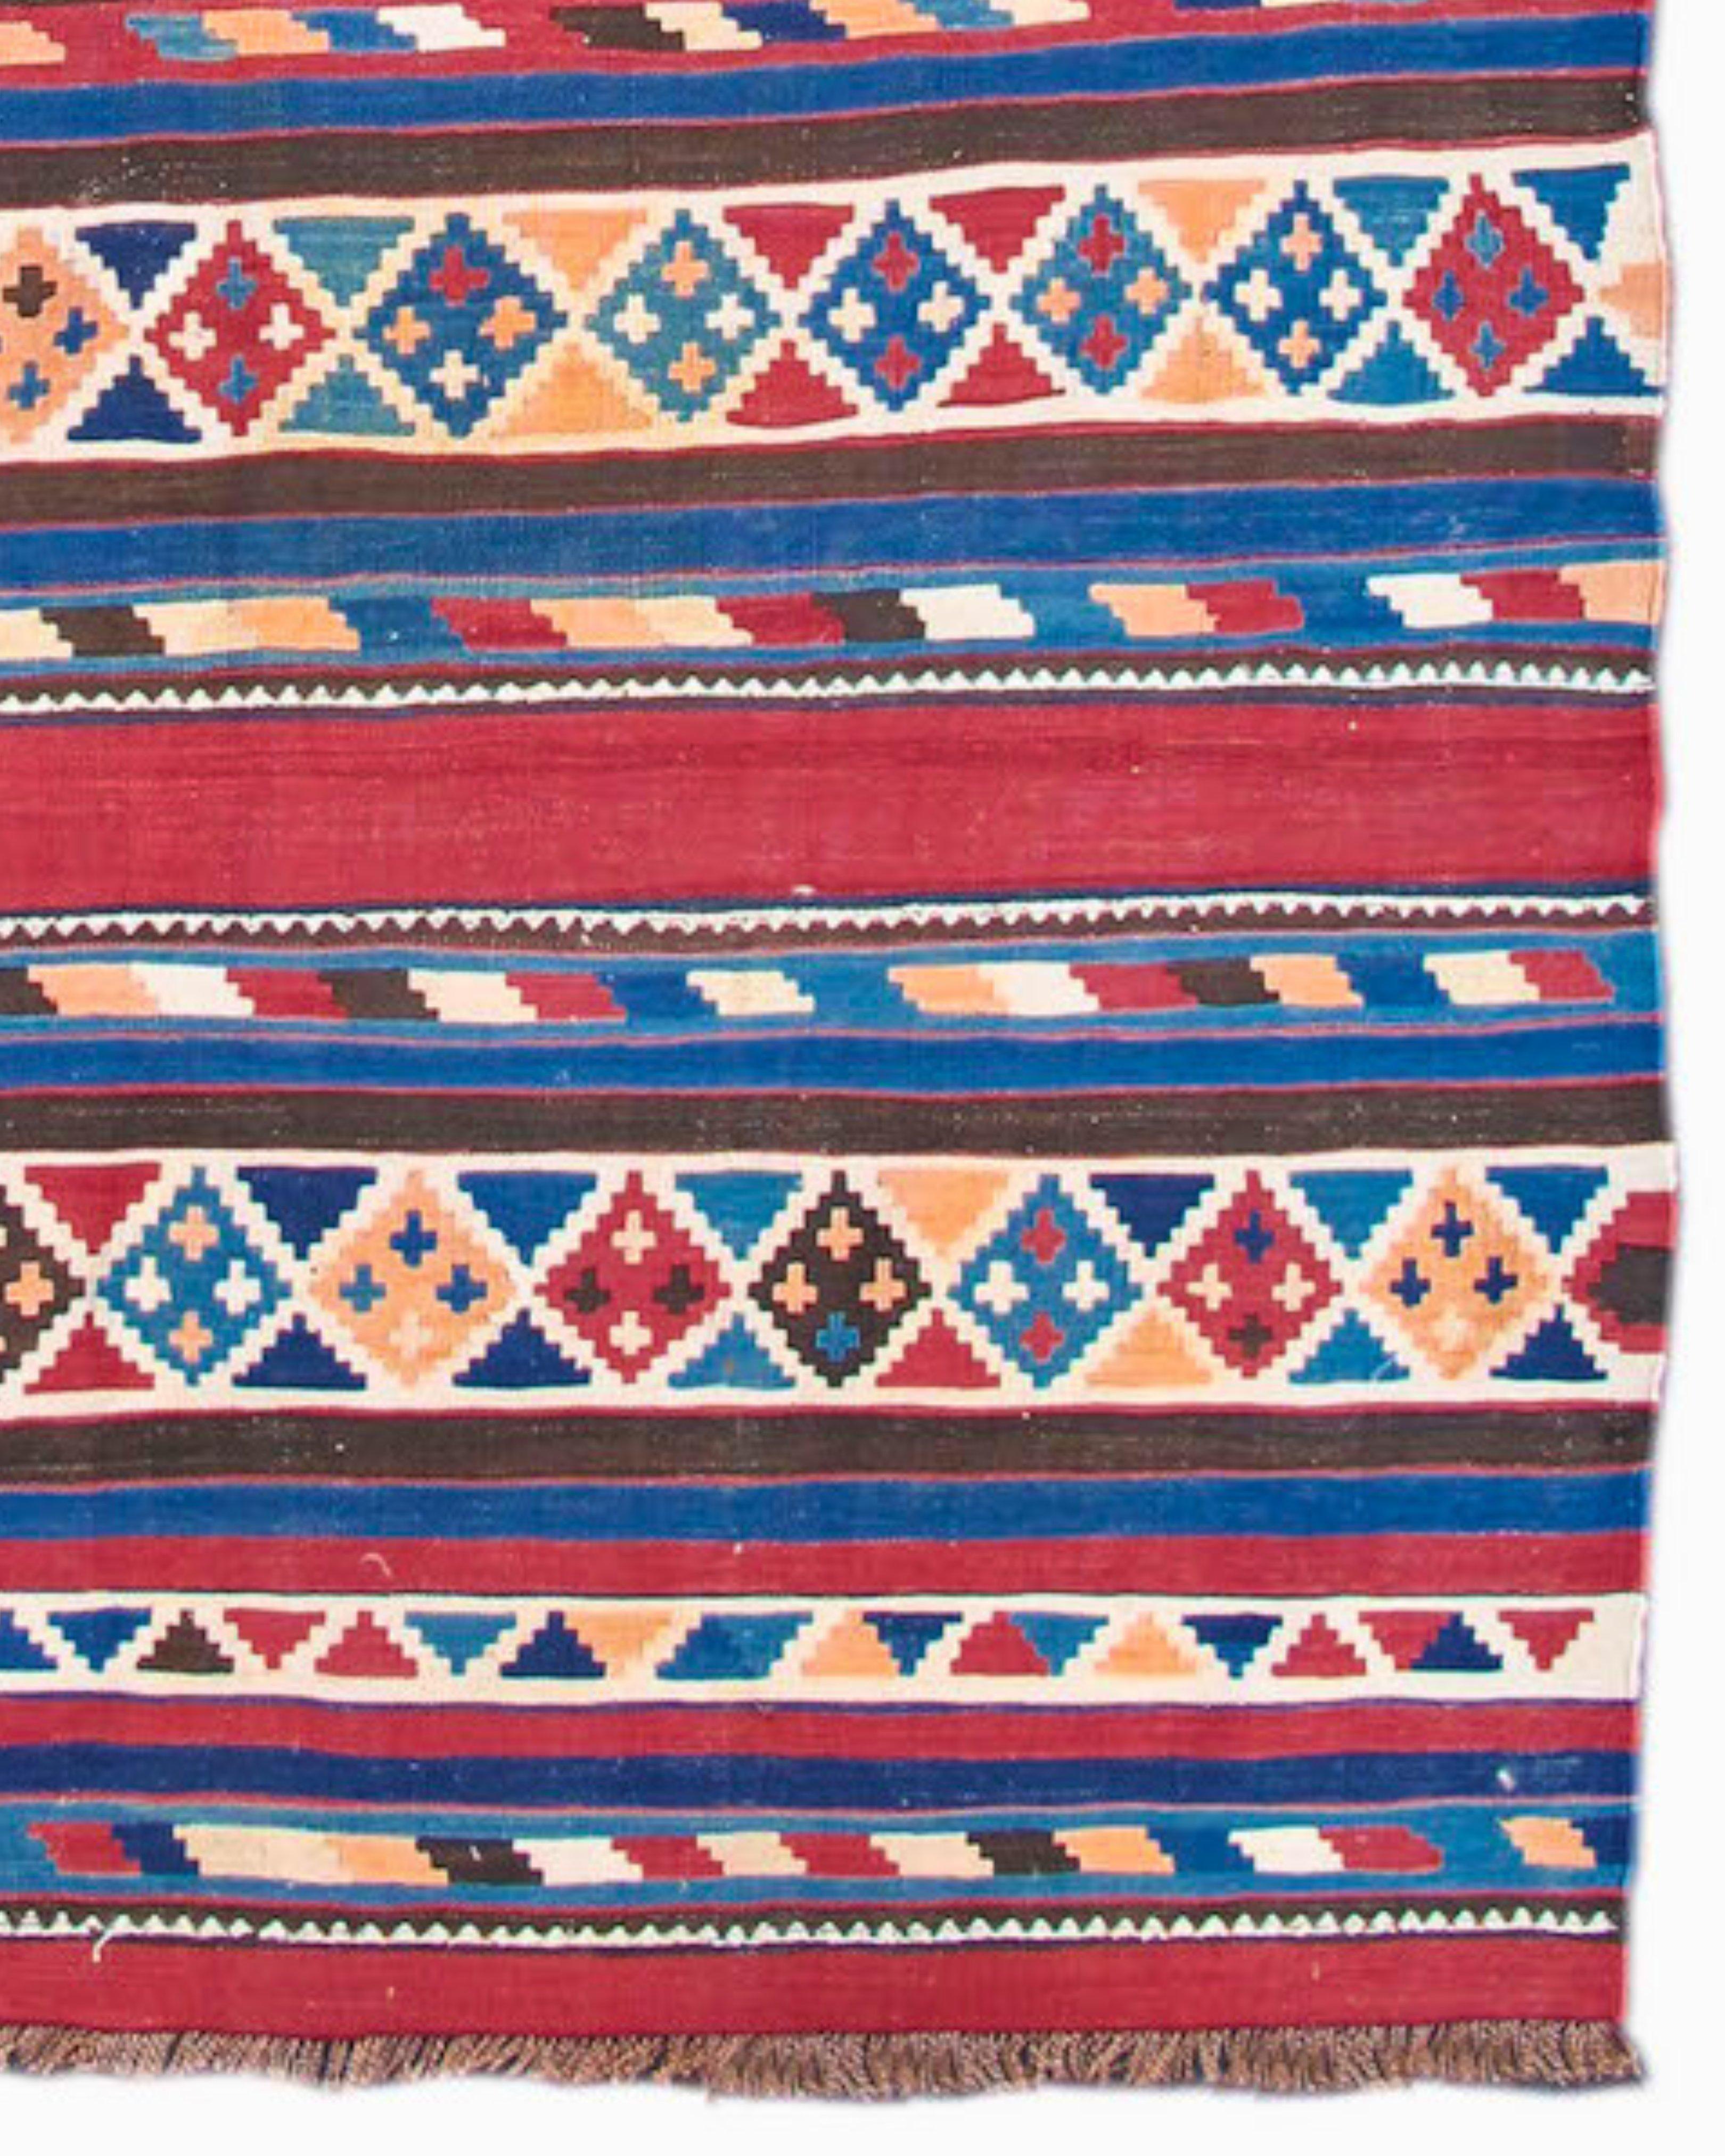 Antique Shahsevan Kilim Rug, c. 1900

This kilim, woven by Shahsevan tribal weavers, was produced in the border area between Persia and the Caucasus. The Shahsevan were comprised of several tribal and ethnic groups brought together by the Imperial